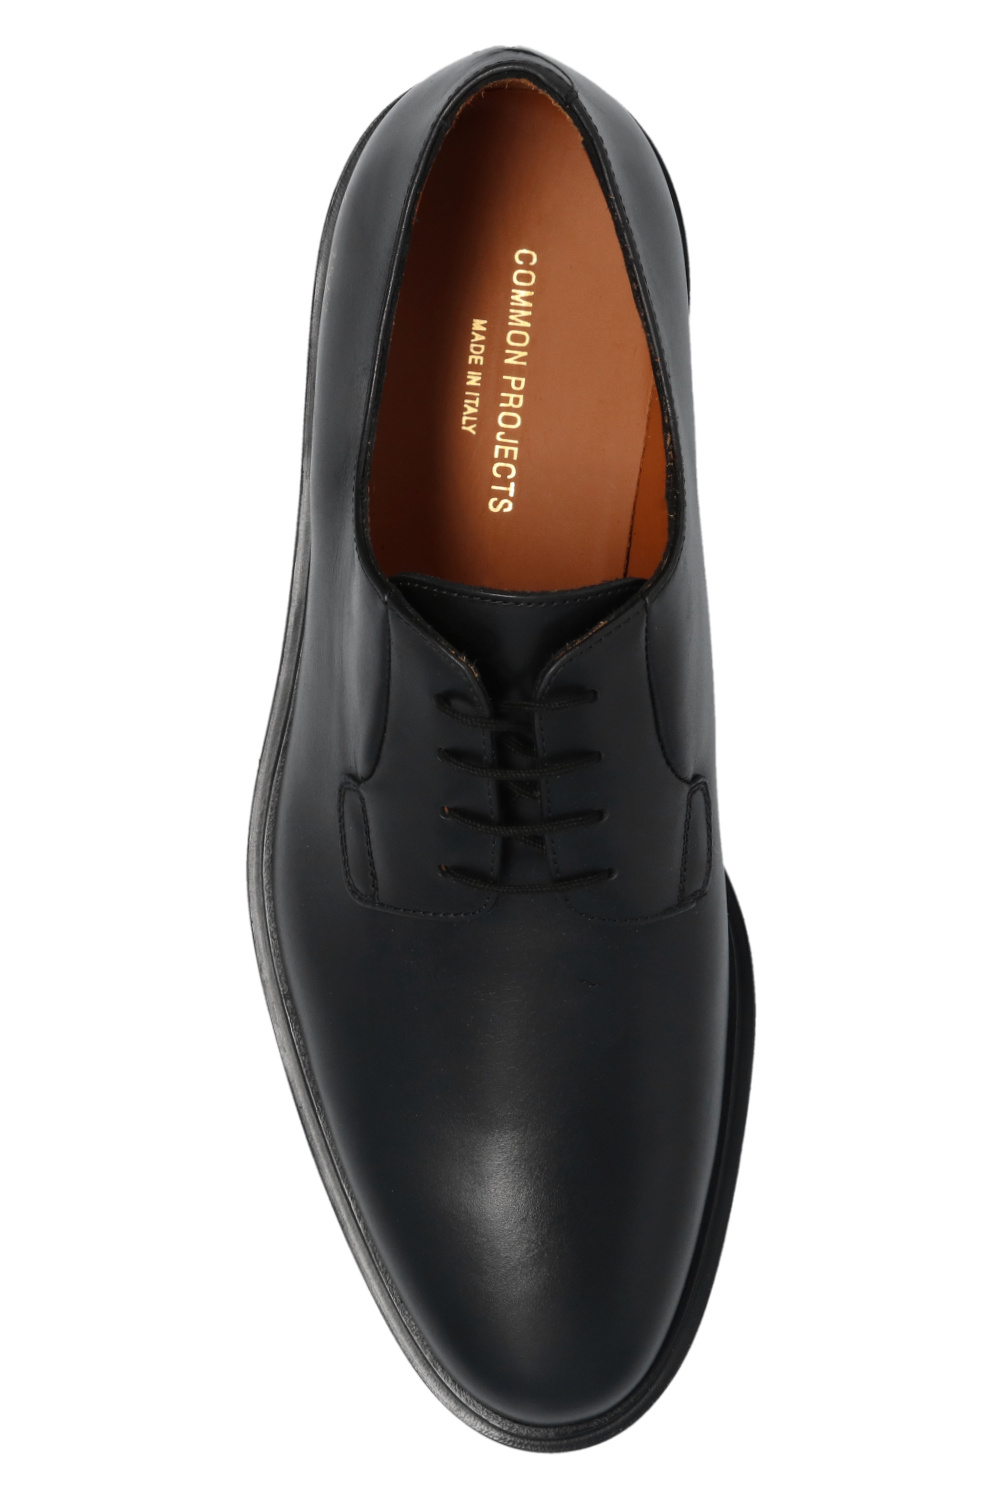 Common Projects Black Type 123 Leather Derby Shoes